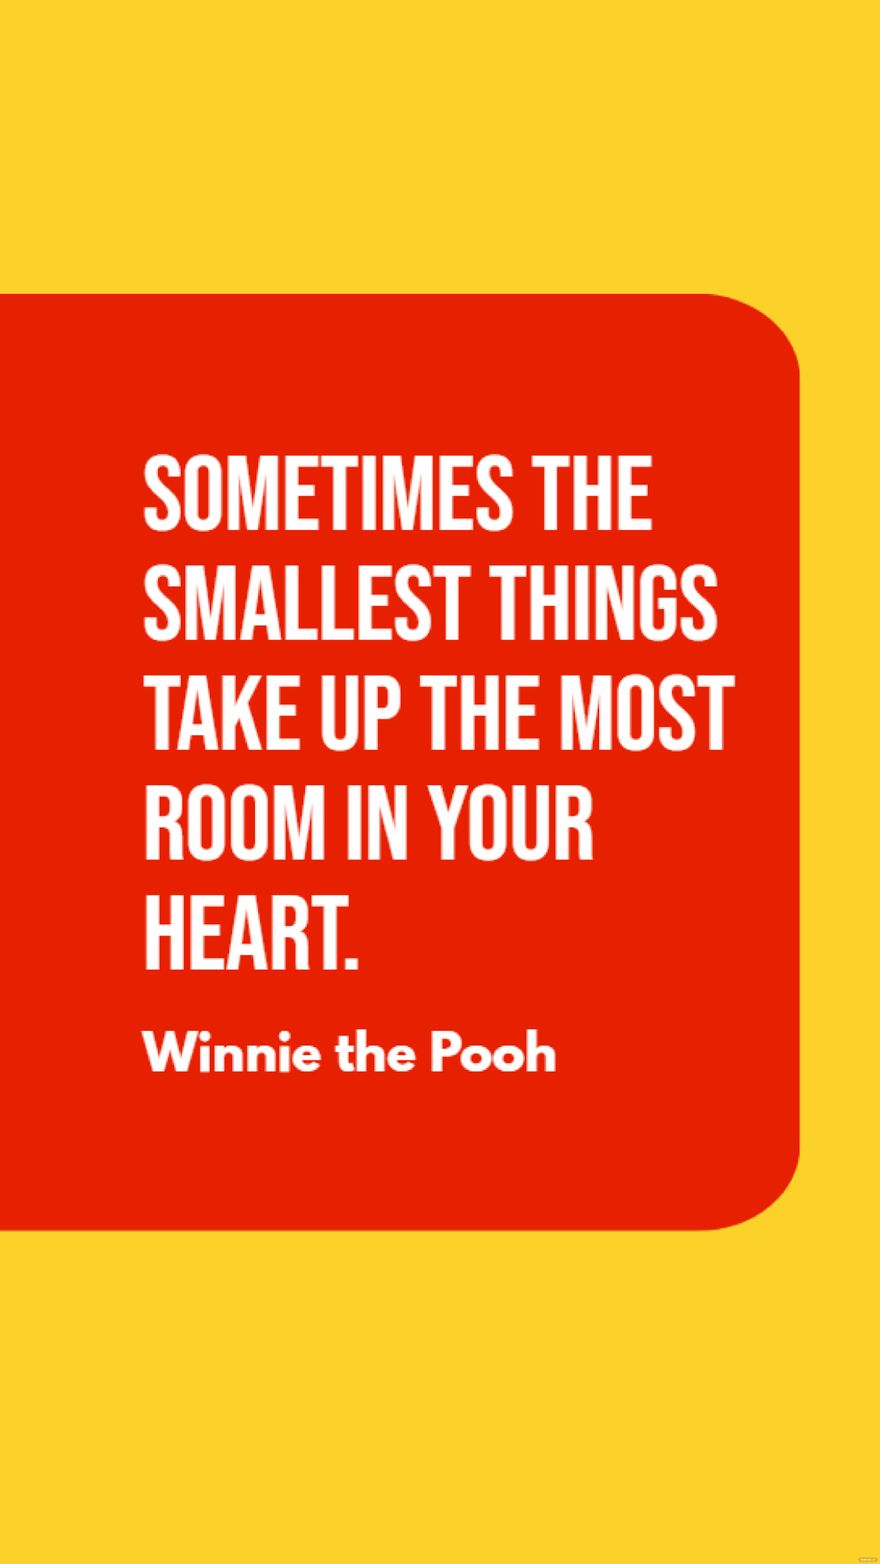 Free Winnie the Pooh - Sometimes the smallest things take up the most room in your heart.